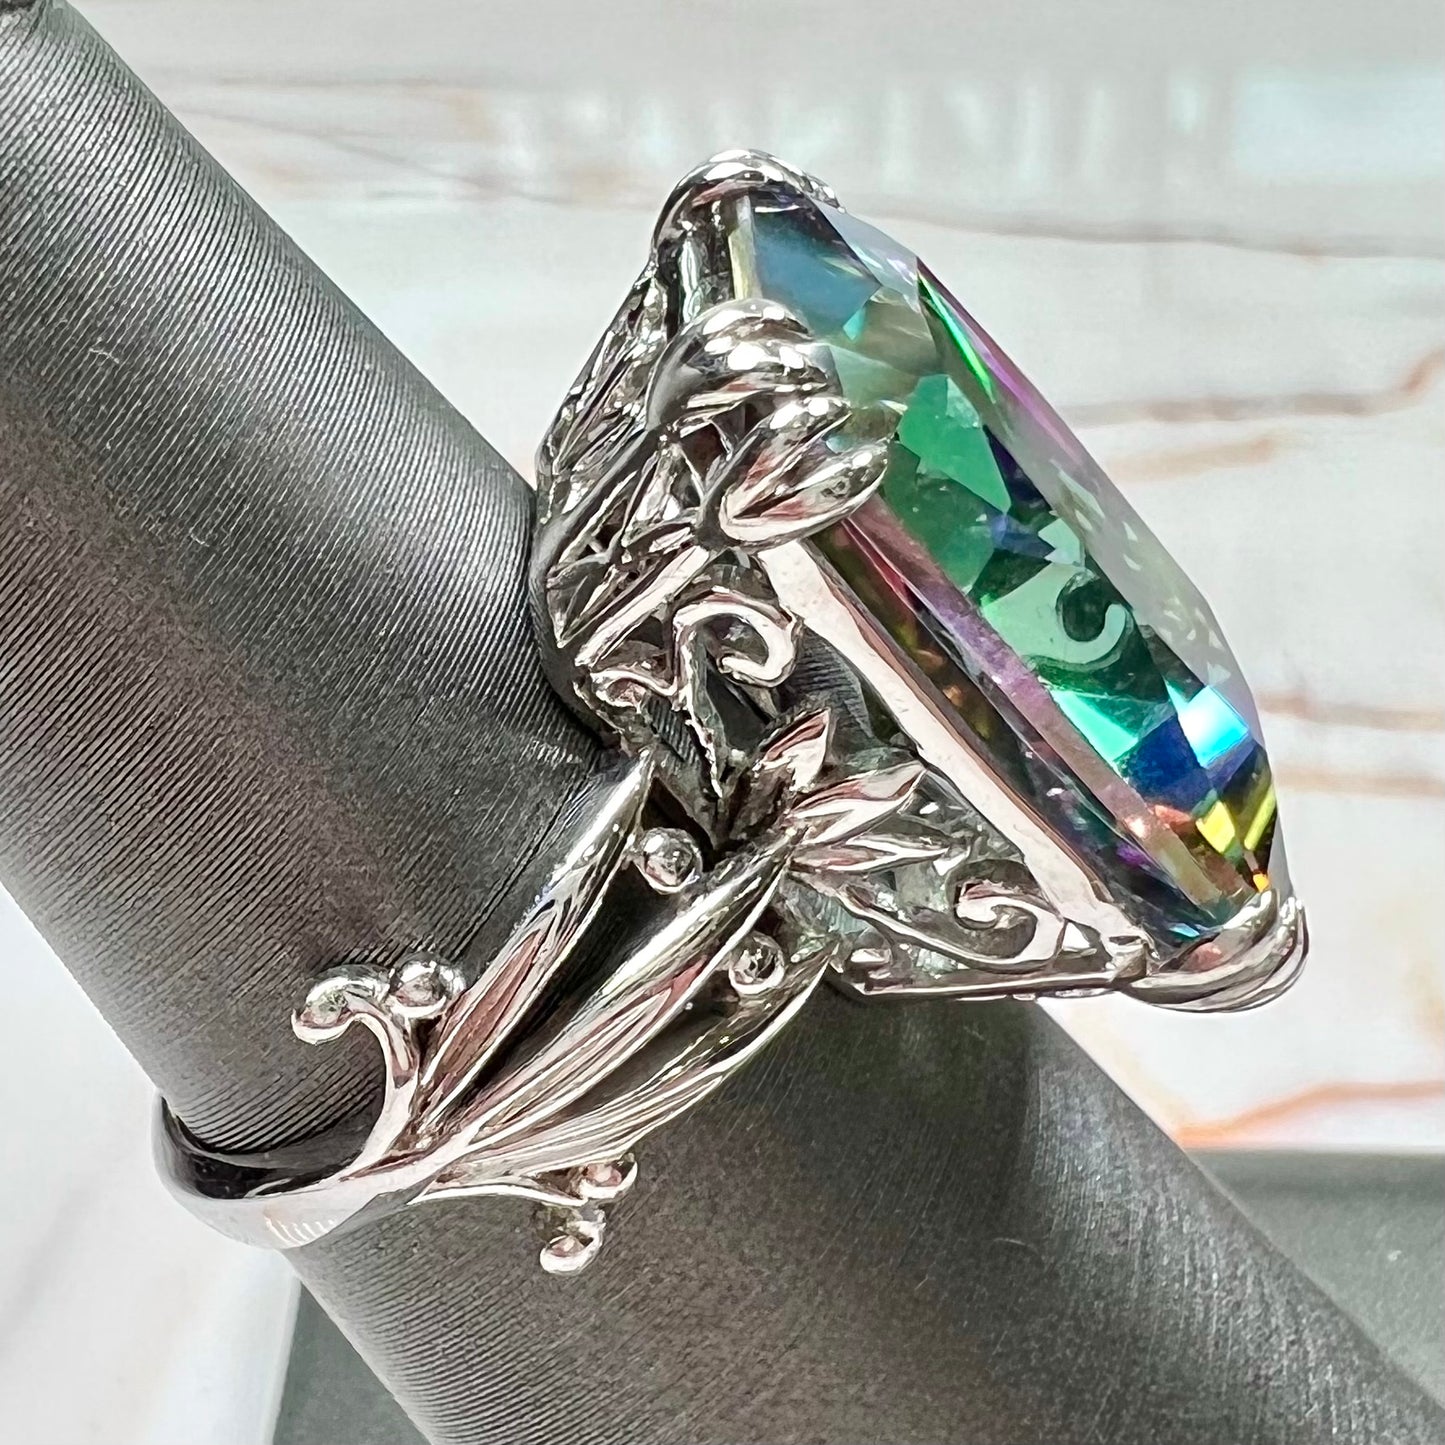 Emerald cut mystic topaz prong set in a decorative sterling silver ring.